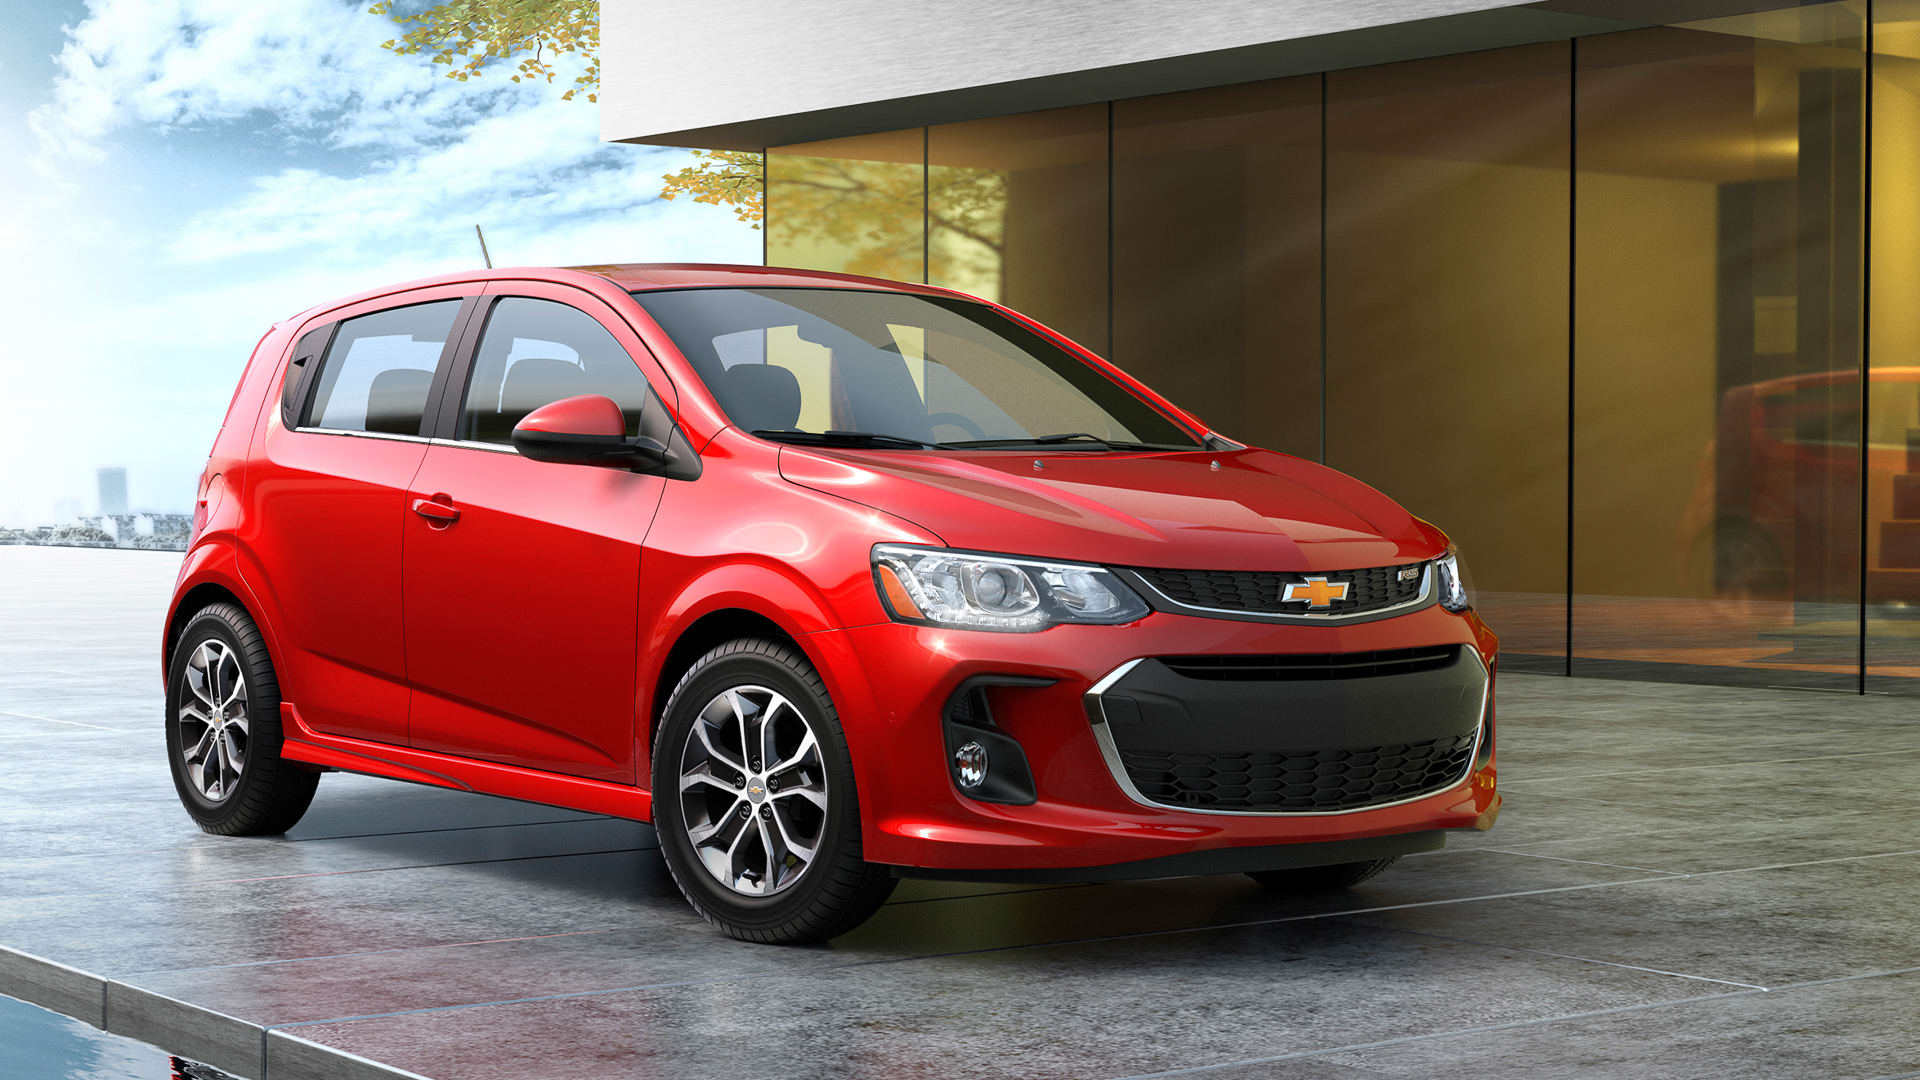 GM ending manufacturing of Chevrolet Sonic amid push towards EVs